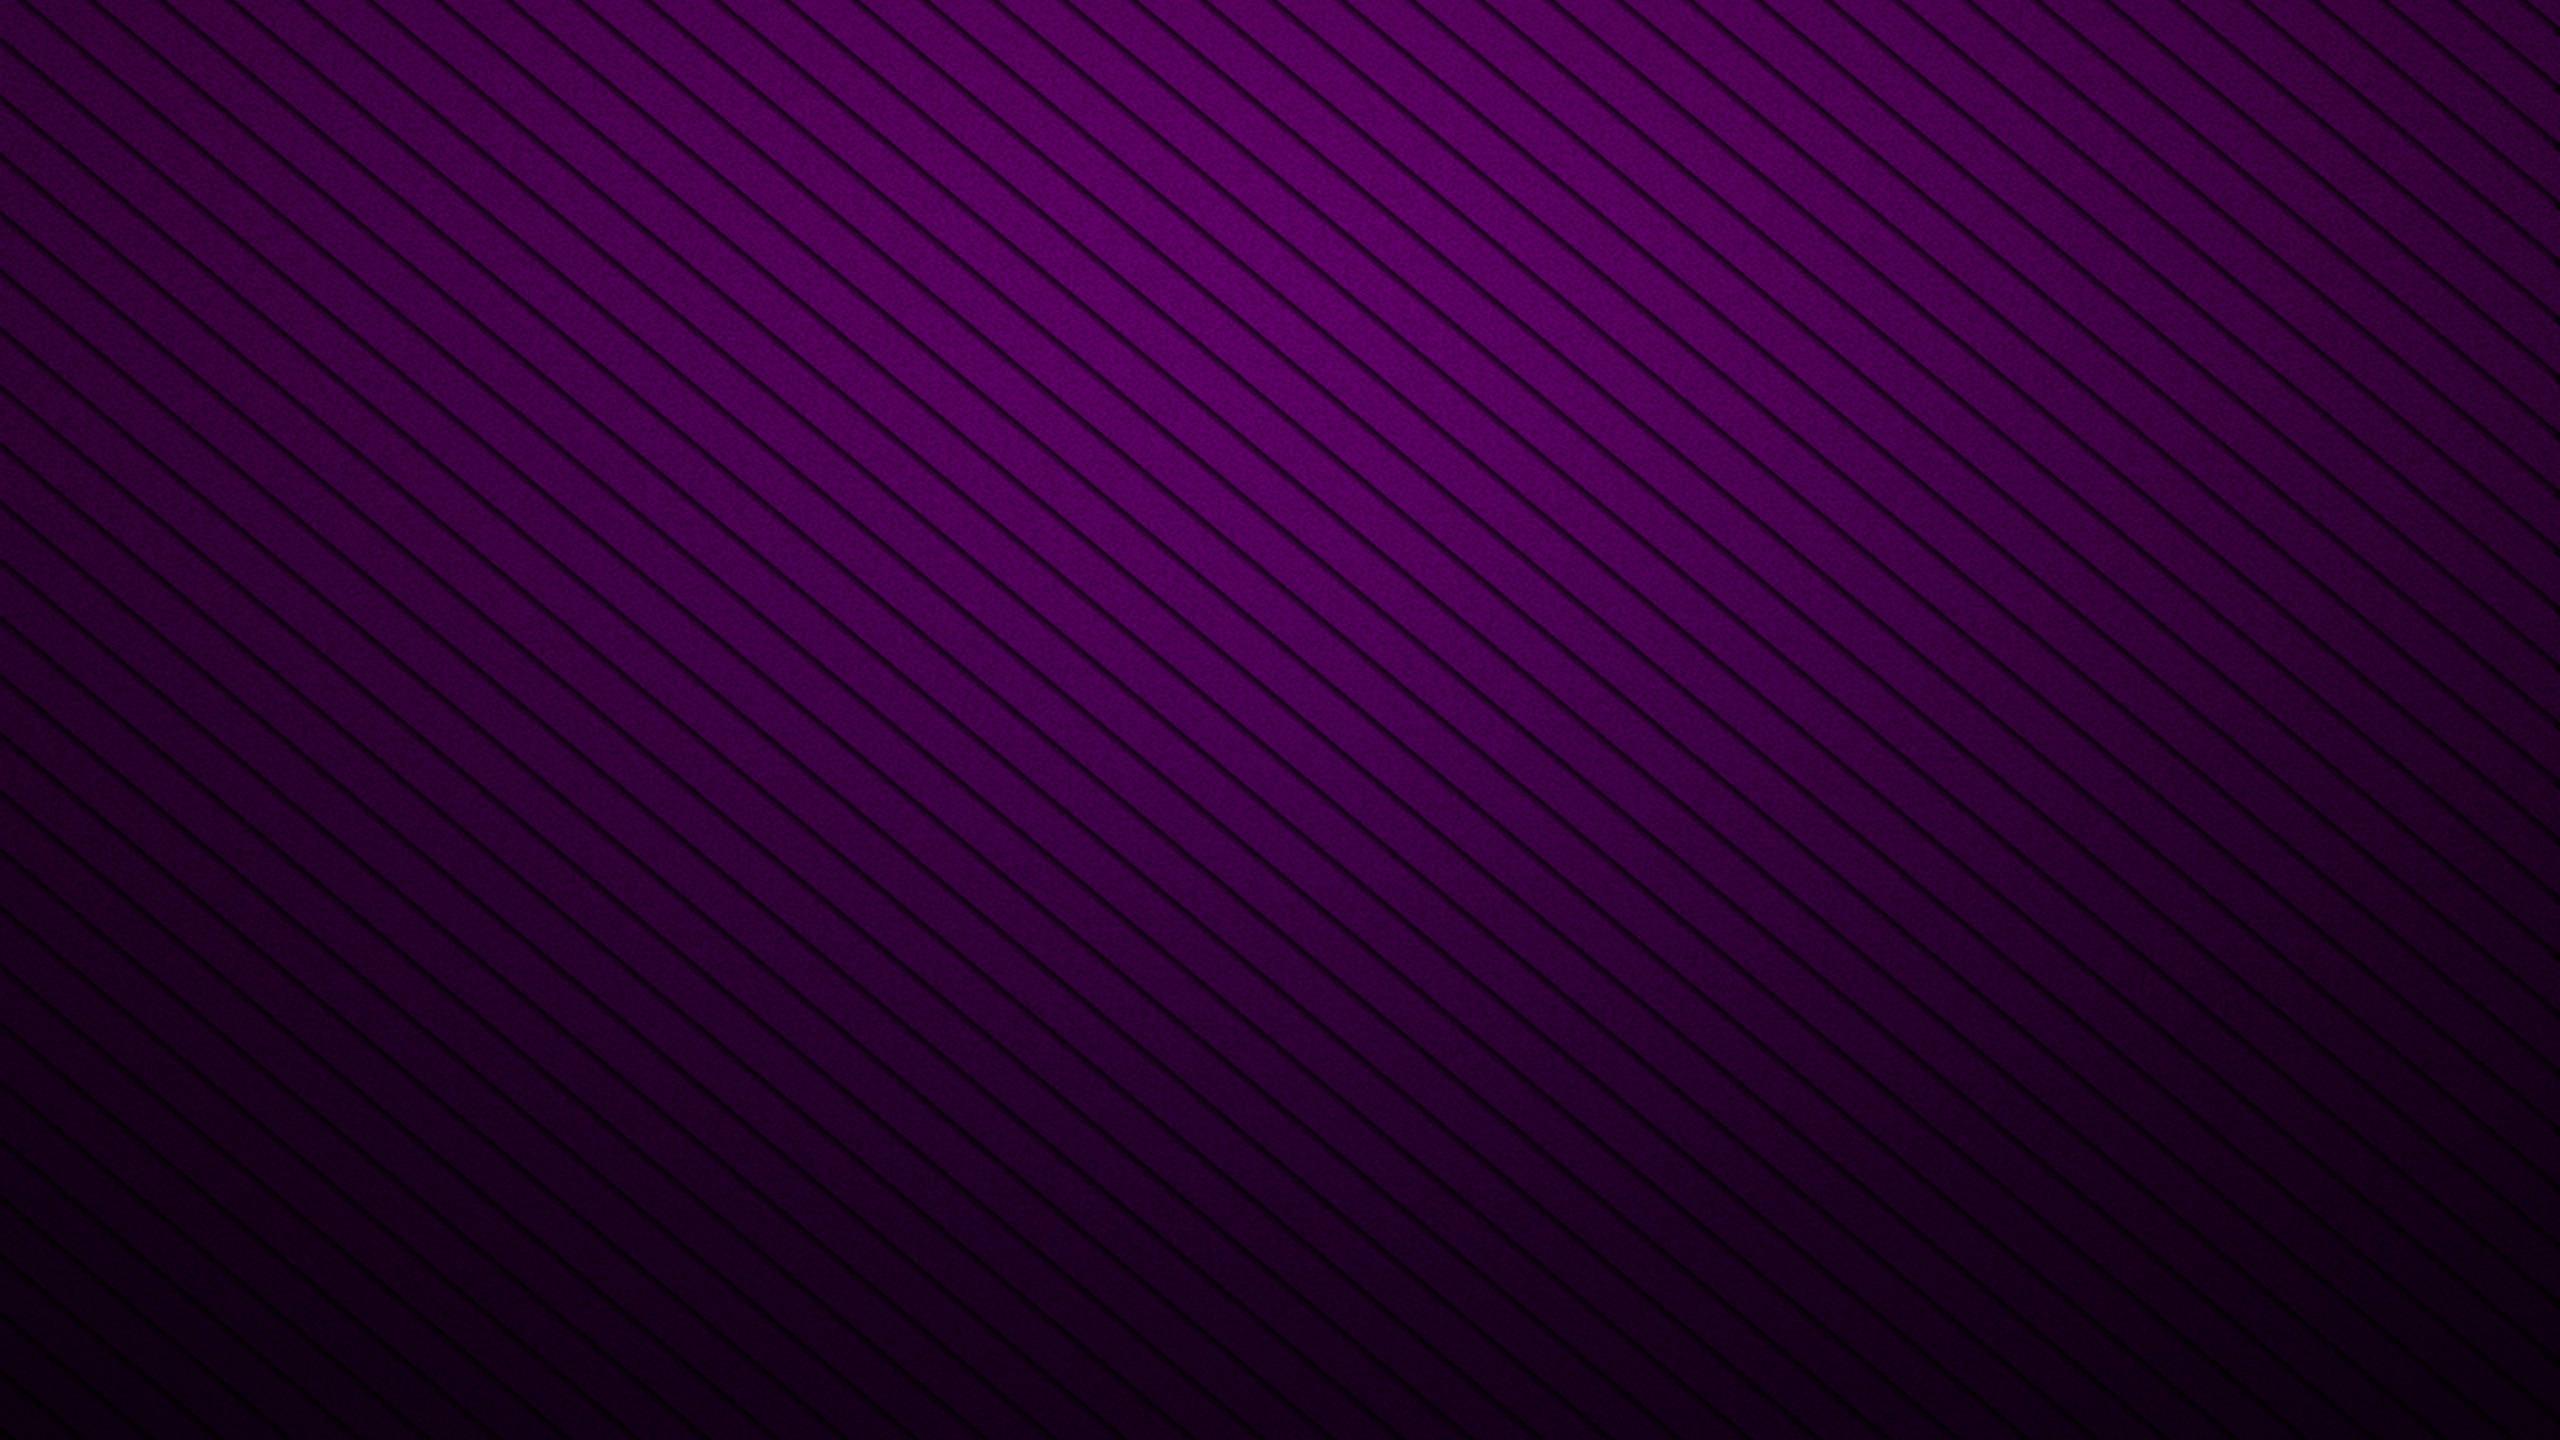 Top black and purple desktop wallpaper free Download Book Source for free download HD, 4K & high quality wallpaper